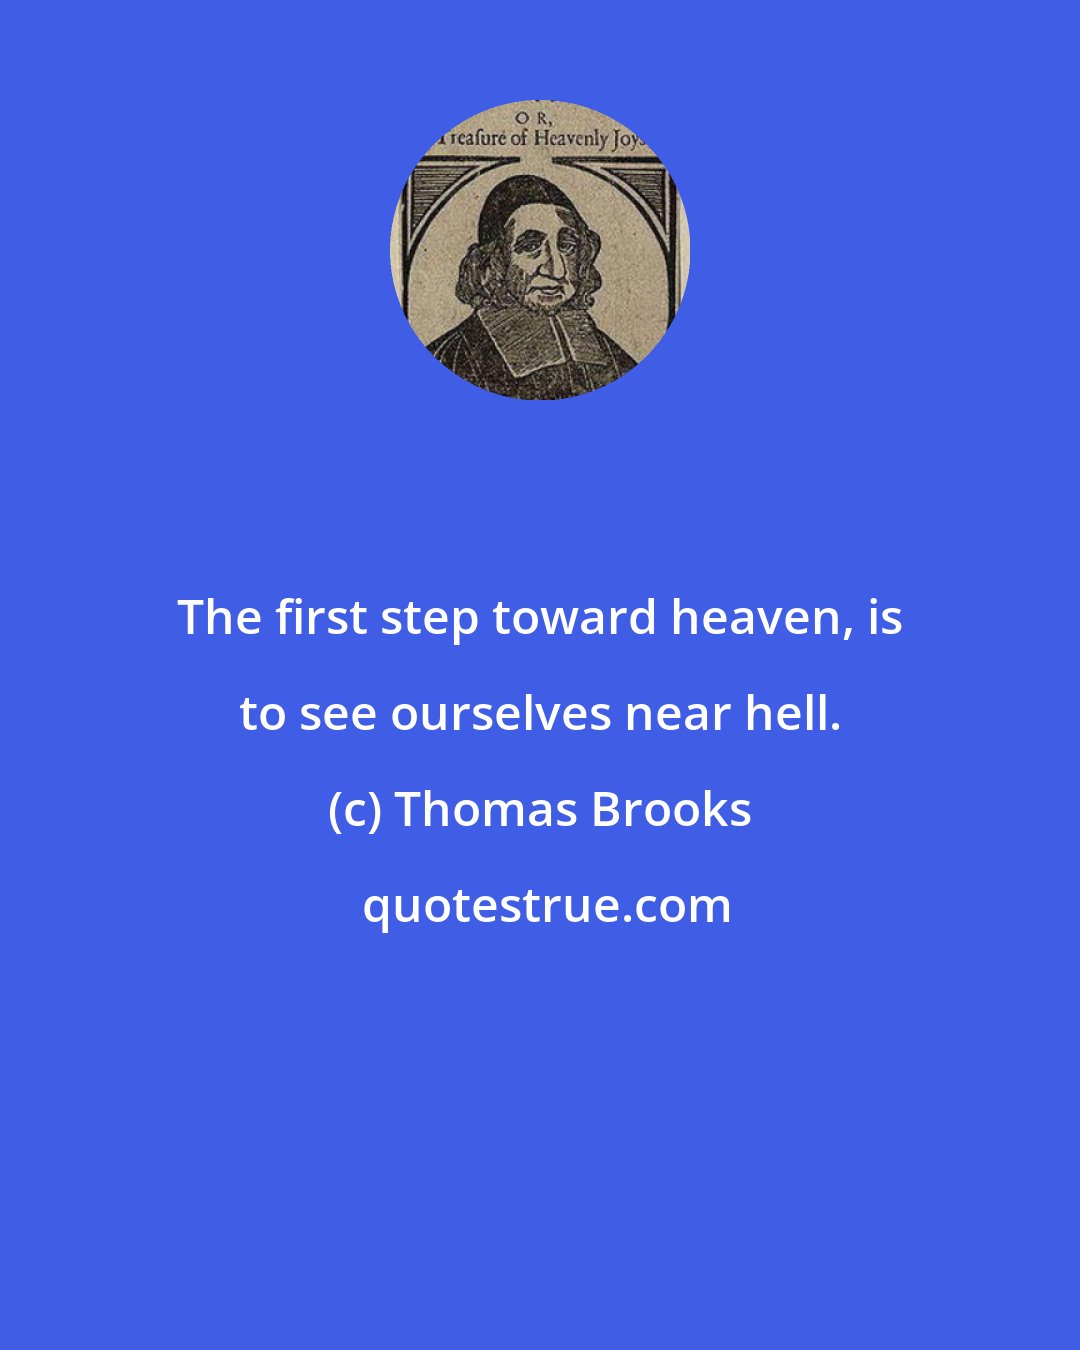 Thomas Brooks: The first step toward heaven, is to see ourselves near hell.